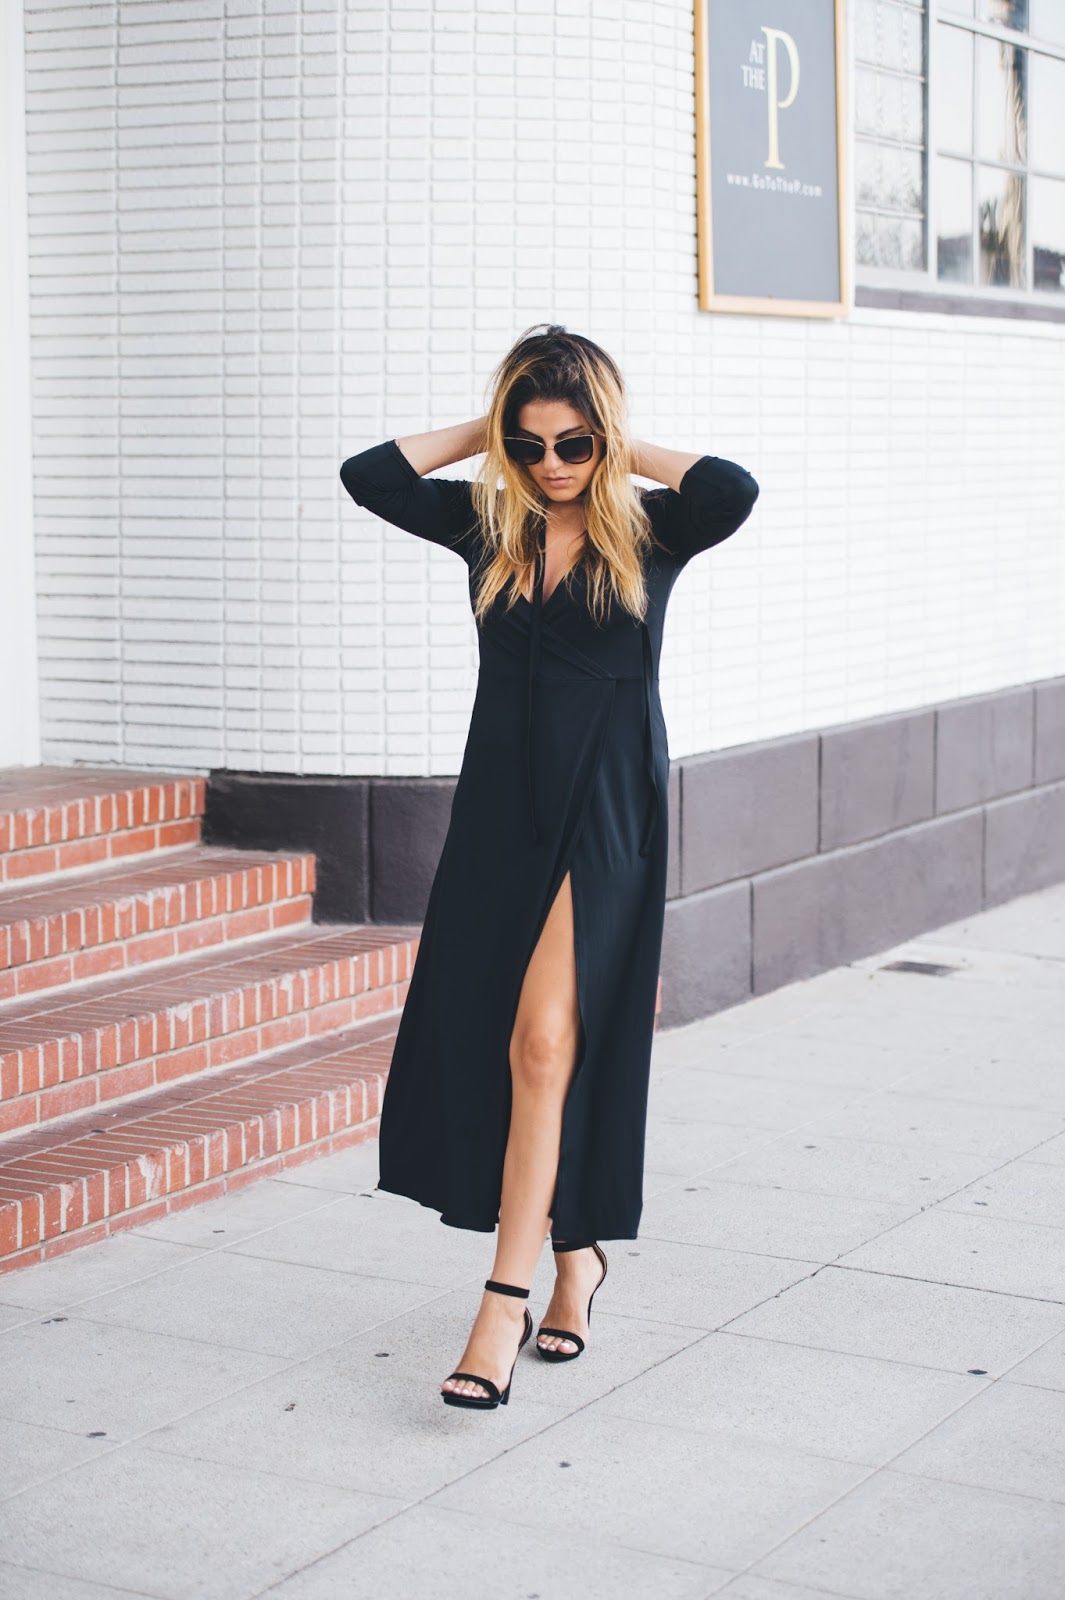 My Cup Of Chic: Thigh High Slit